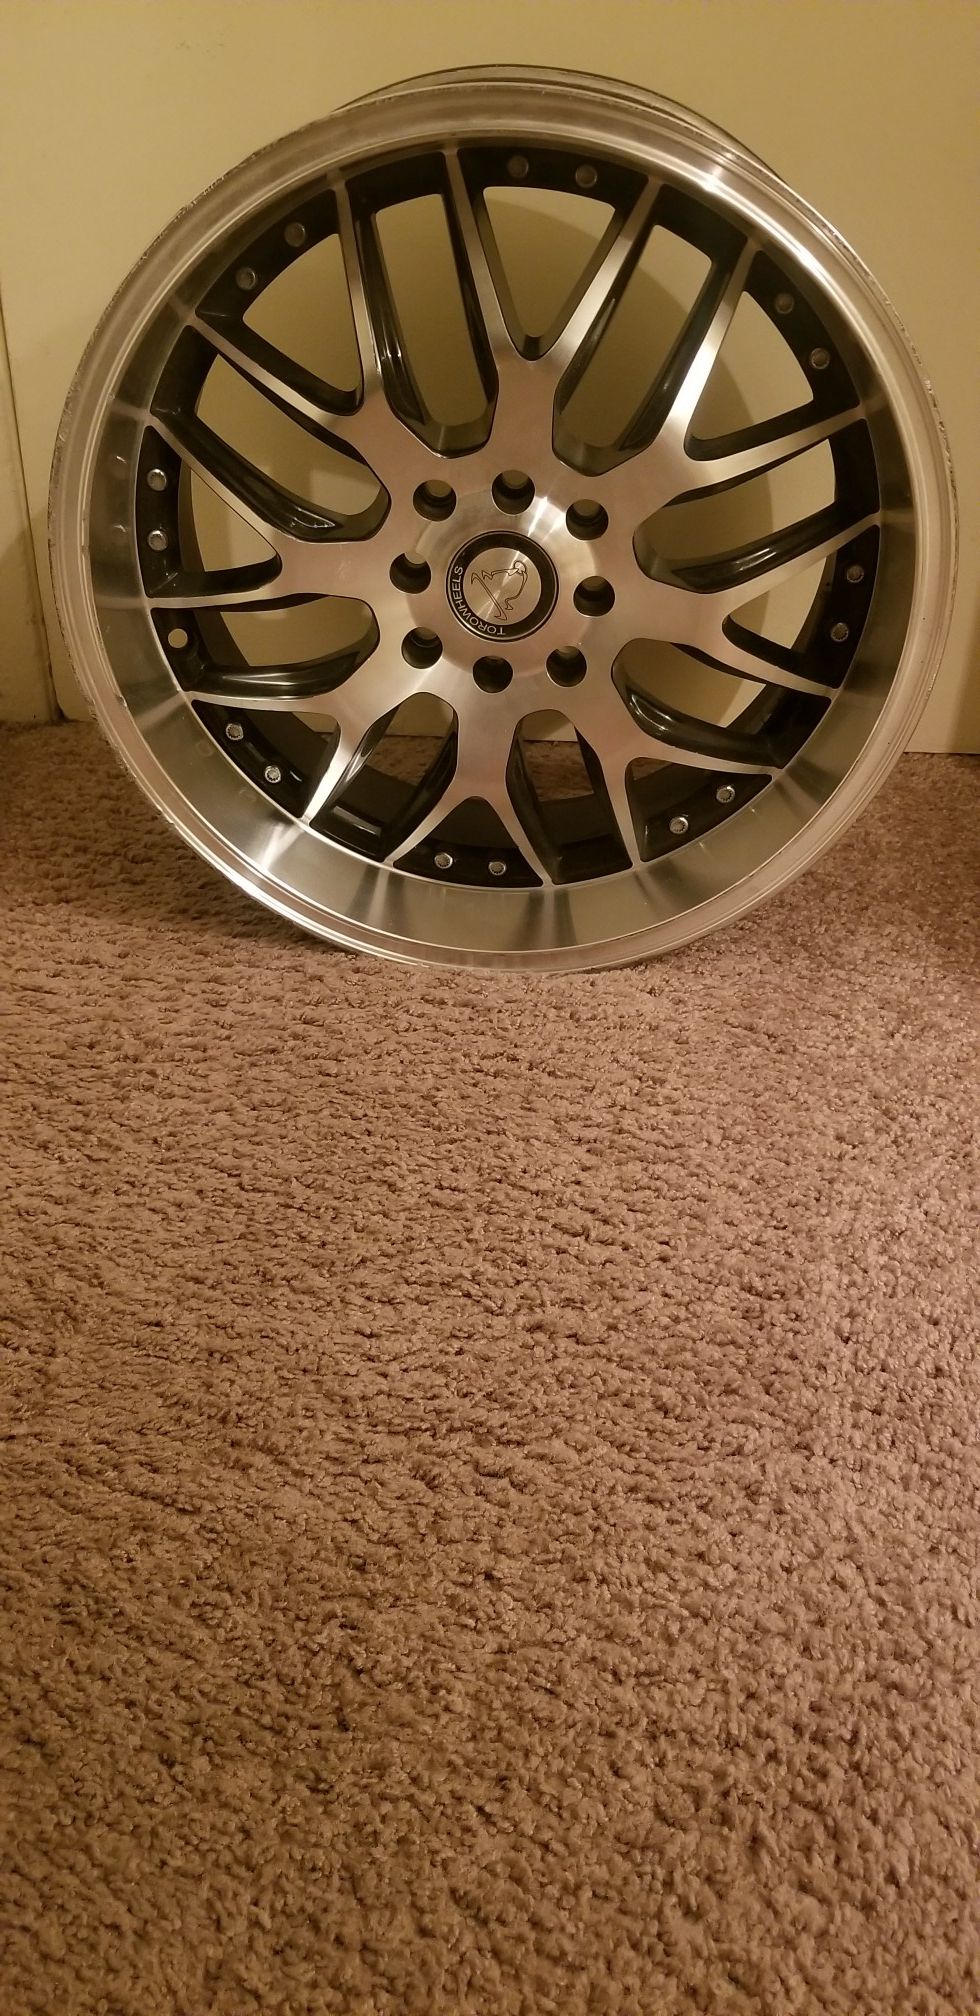 All 4 Rims 4 lug universal 17×7.5 came off a nissan cube